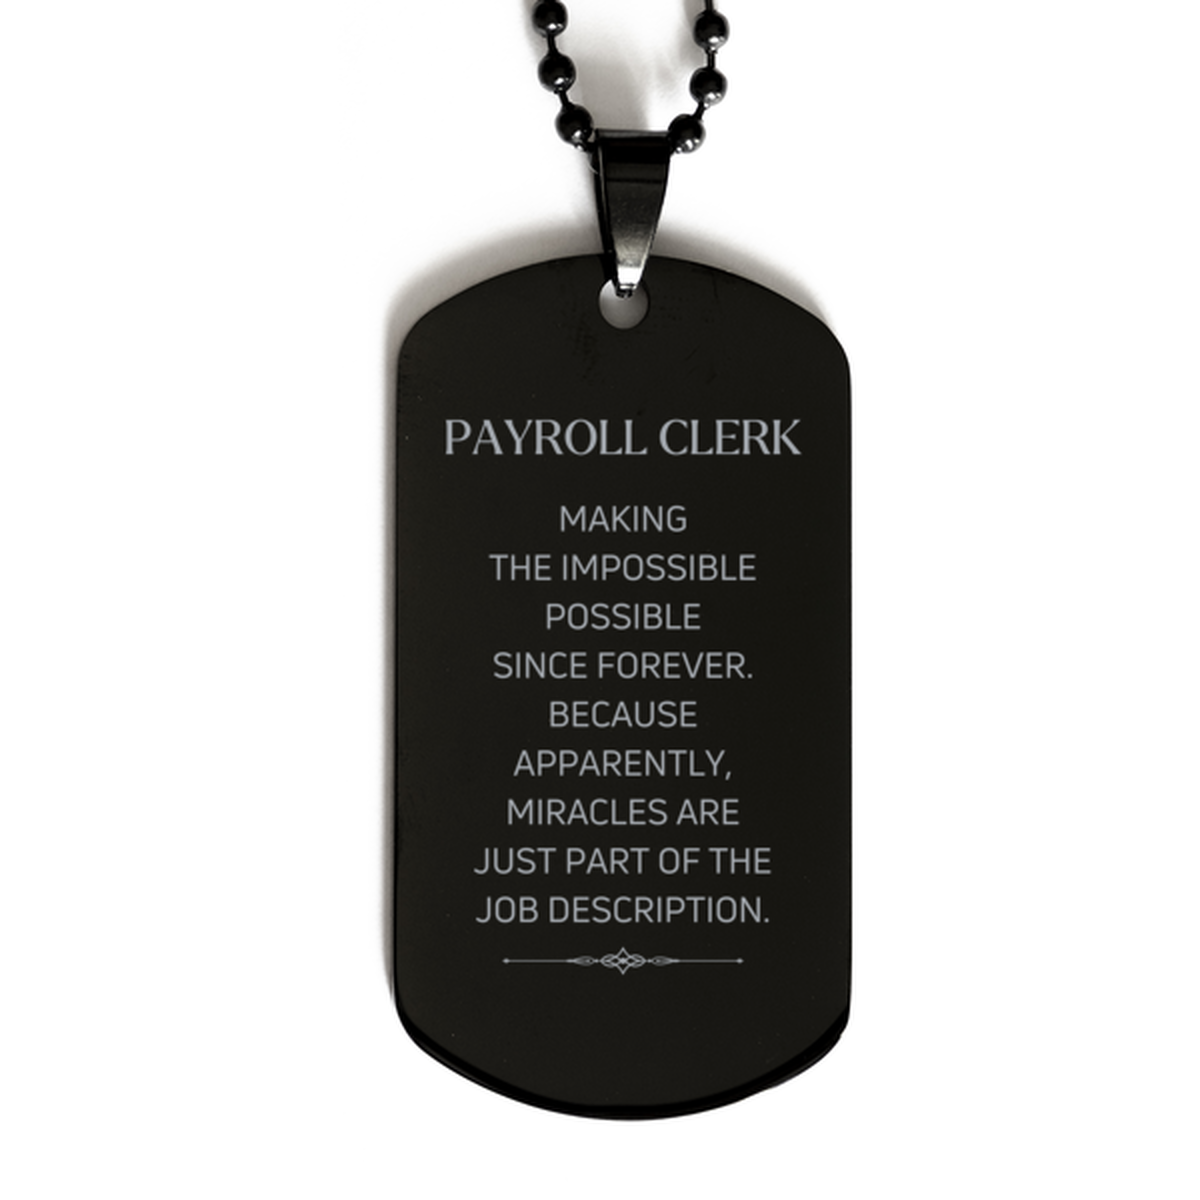 Funny Payroll Clerk Gifts, Miracles are just part of the job description, Inspirational Birthday Black Dog Tag For Payroll Clerk, Men, Women, Coworkers, Friends, Boss